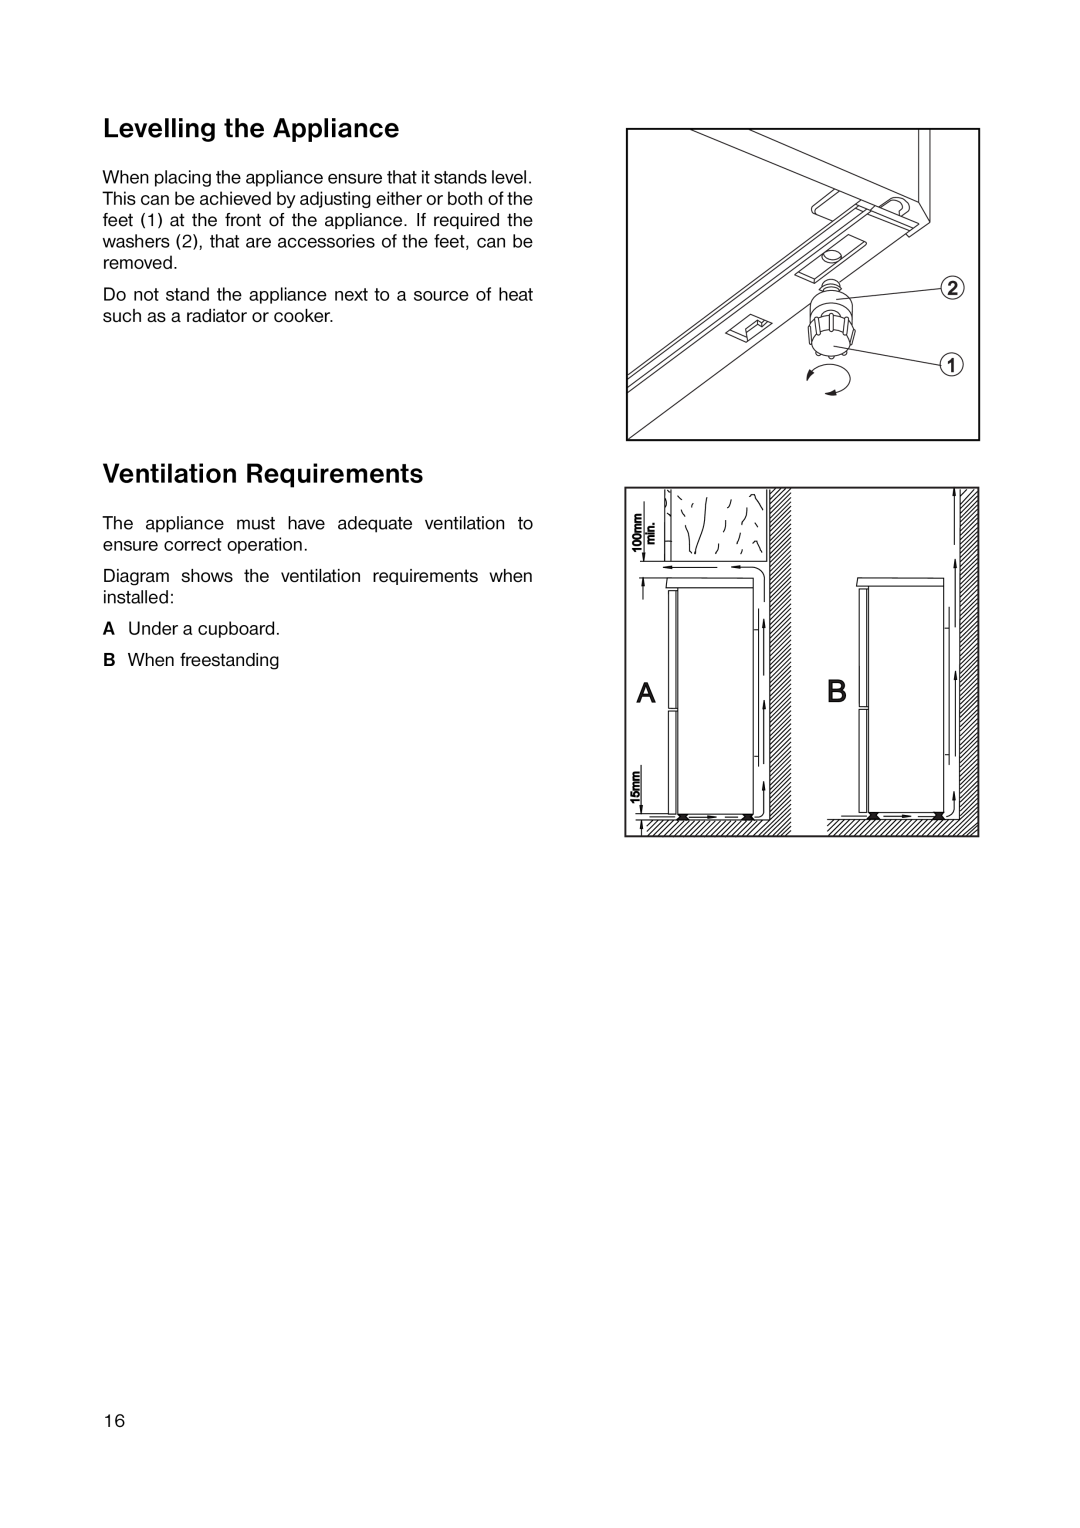 Zanussi ZRB 2641 manual Levelling the Appliance, Ventilation Requirements 